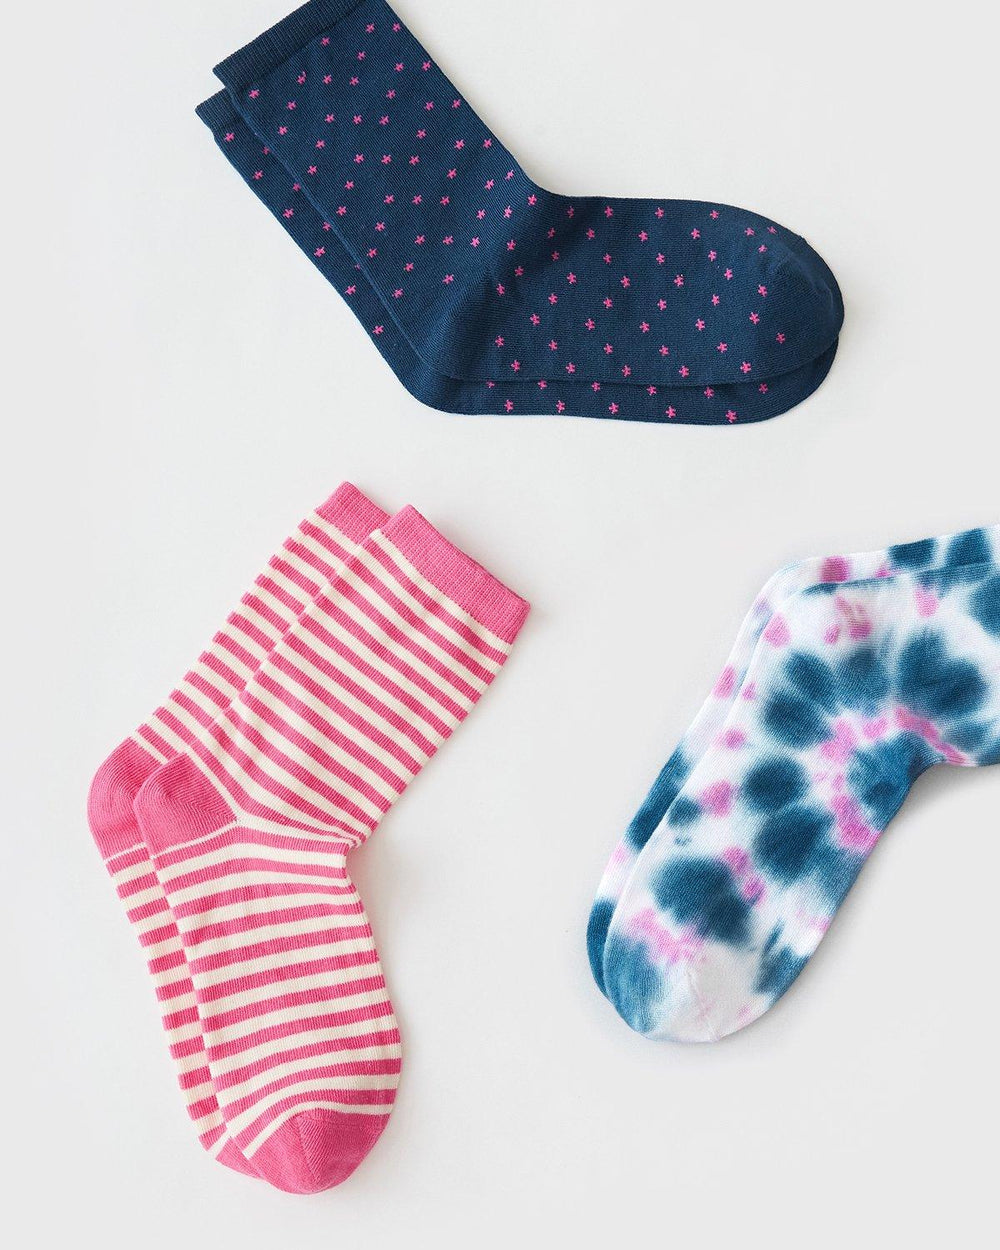 Biodegradable Socks 3 Pairs - Pink Punch Stripe & Stare